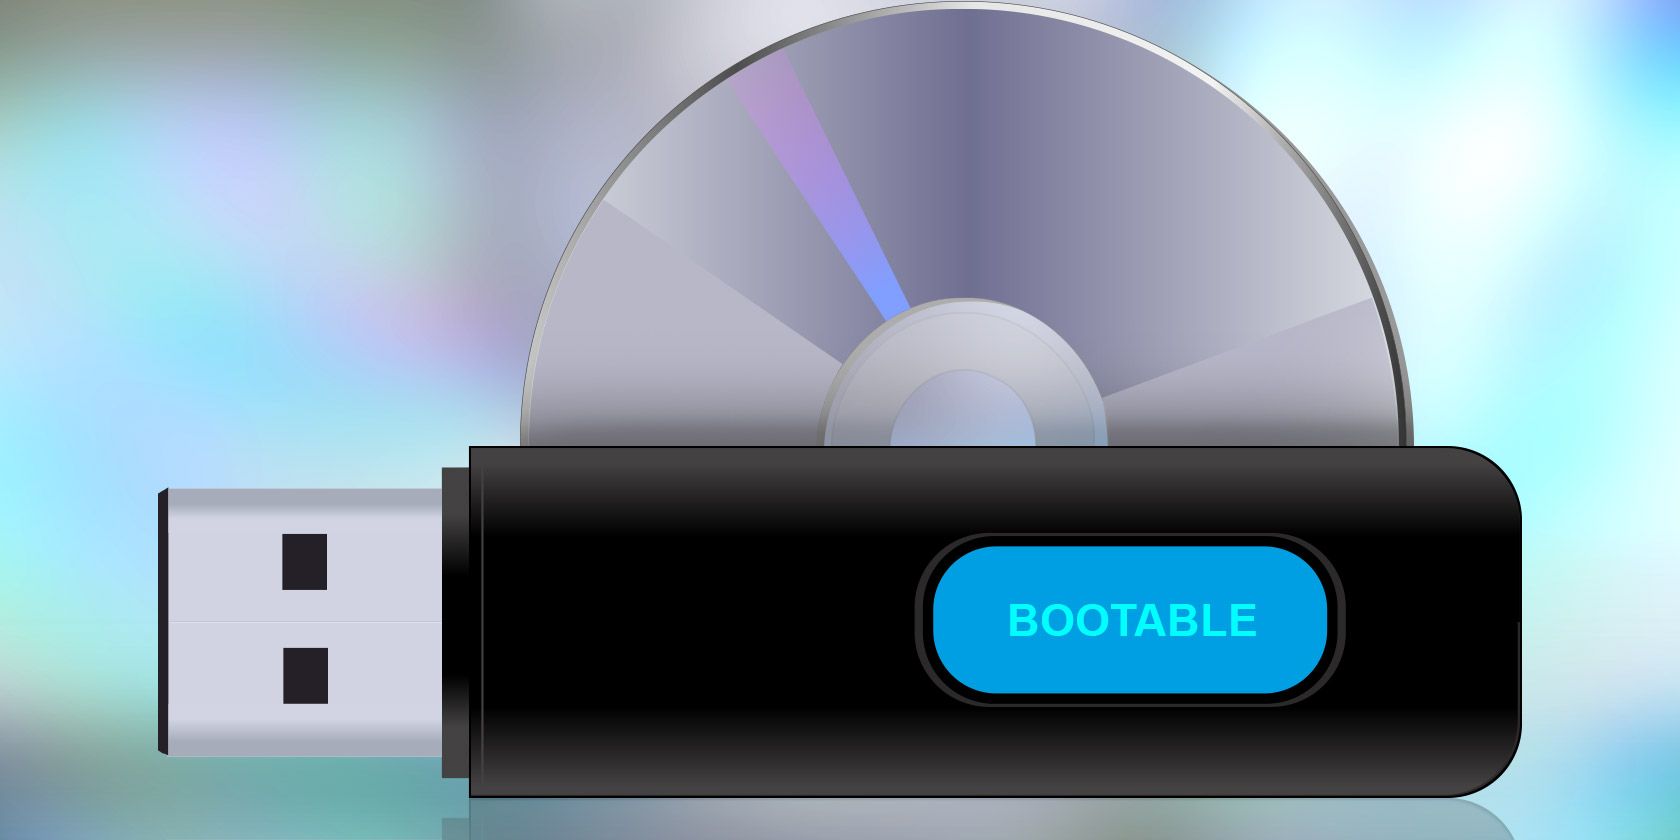 Kansen kwaad ga verder How to Create a Bootable USB From an ISO: 6 Useful Tools